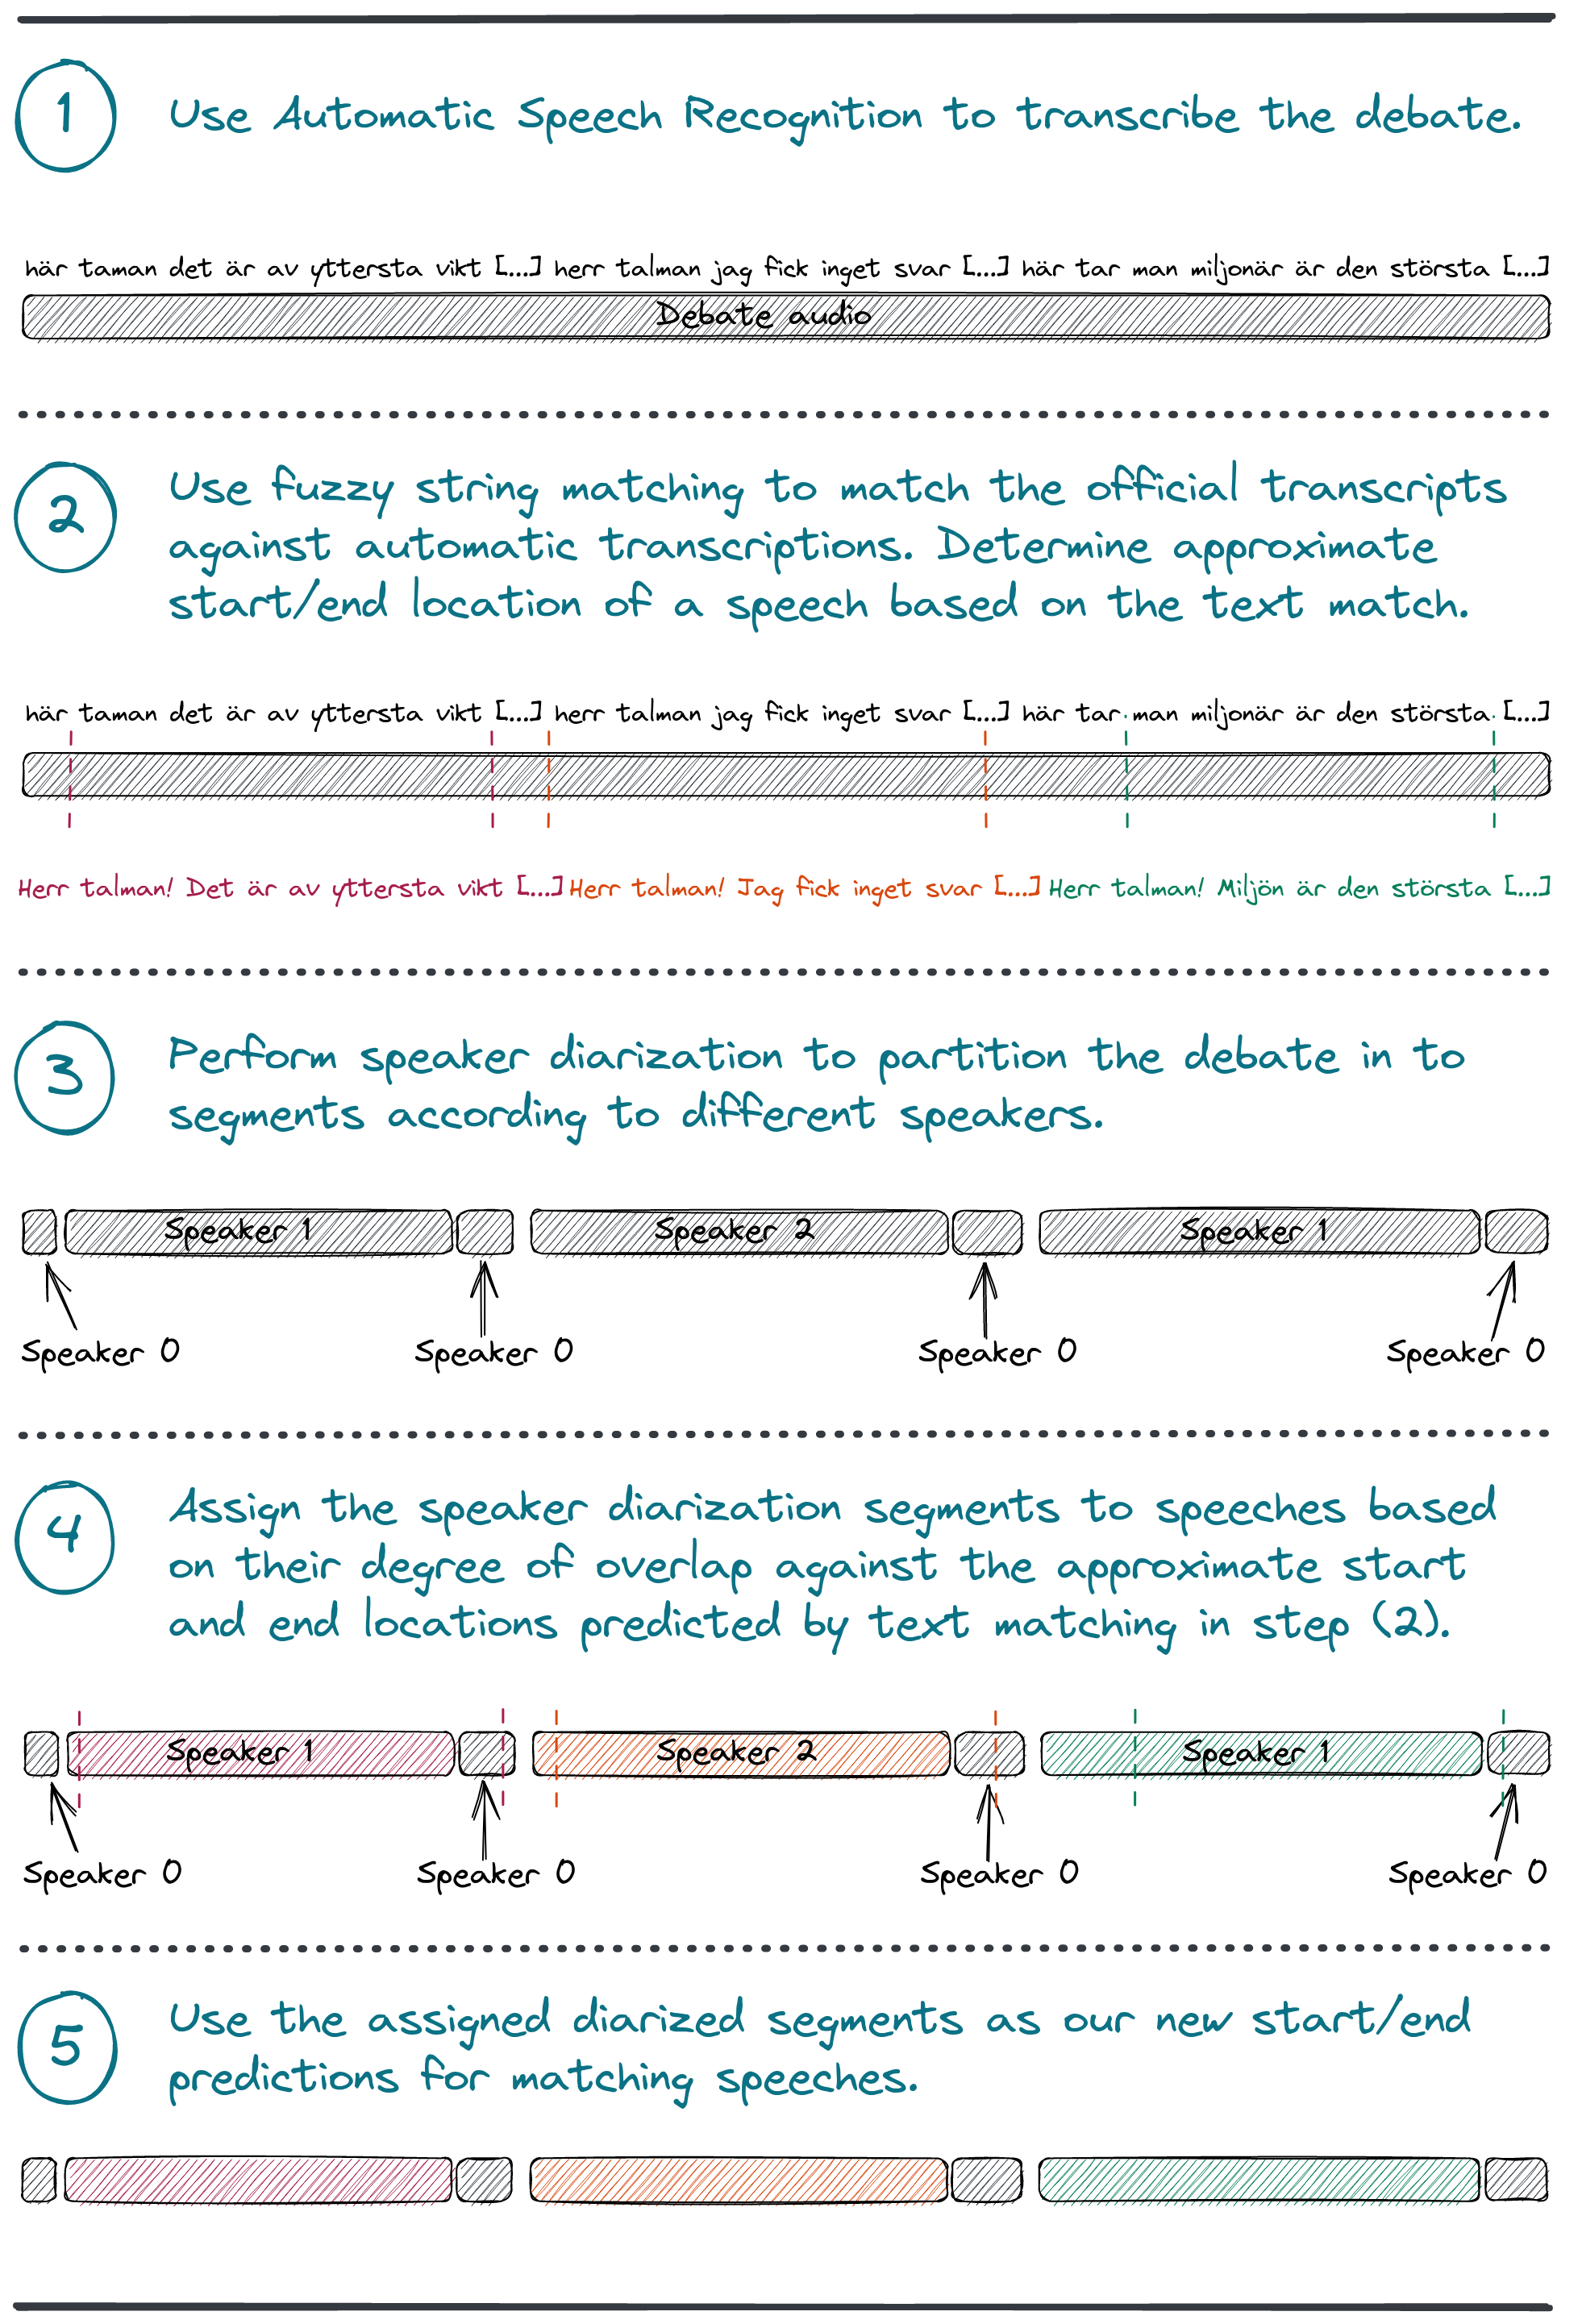 An illustrative sketch with text, describing in 5 steps how KBLab's method for finding speeches in audio files works. Step 1 is to use automatic speech recognition to transcribe an audio file. Step 2 is to fuzzy string match the ASR output against official transcripts to get approximate start and end locations for a speech. Step 3 is to perform speaker diarization to partition the audio file in to segments of different speakers. Step 4 is to assign speaker diarization segments with high degree of overlap with the speeches associated with the approximate start and end locations as predicted by fuzzy string match. Step 5 is to use start and end locations of the assigned segments as the new predictions of metadata for when a speech begins and ends.